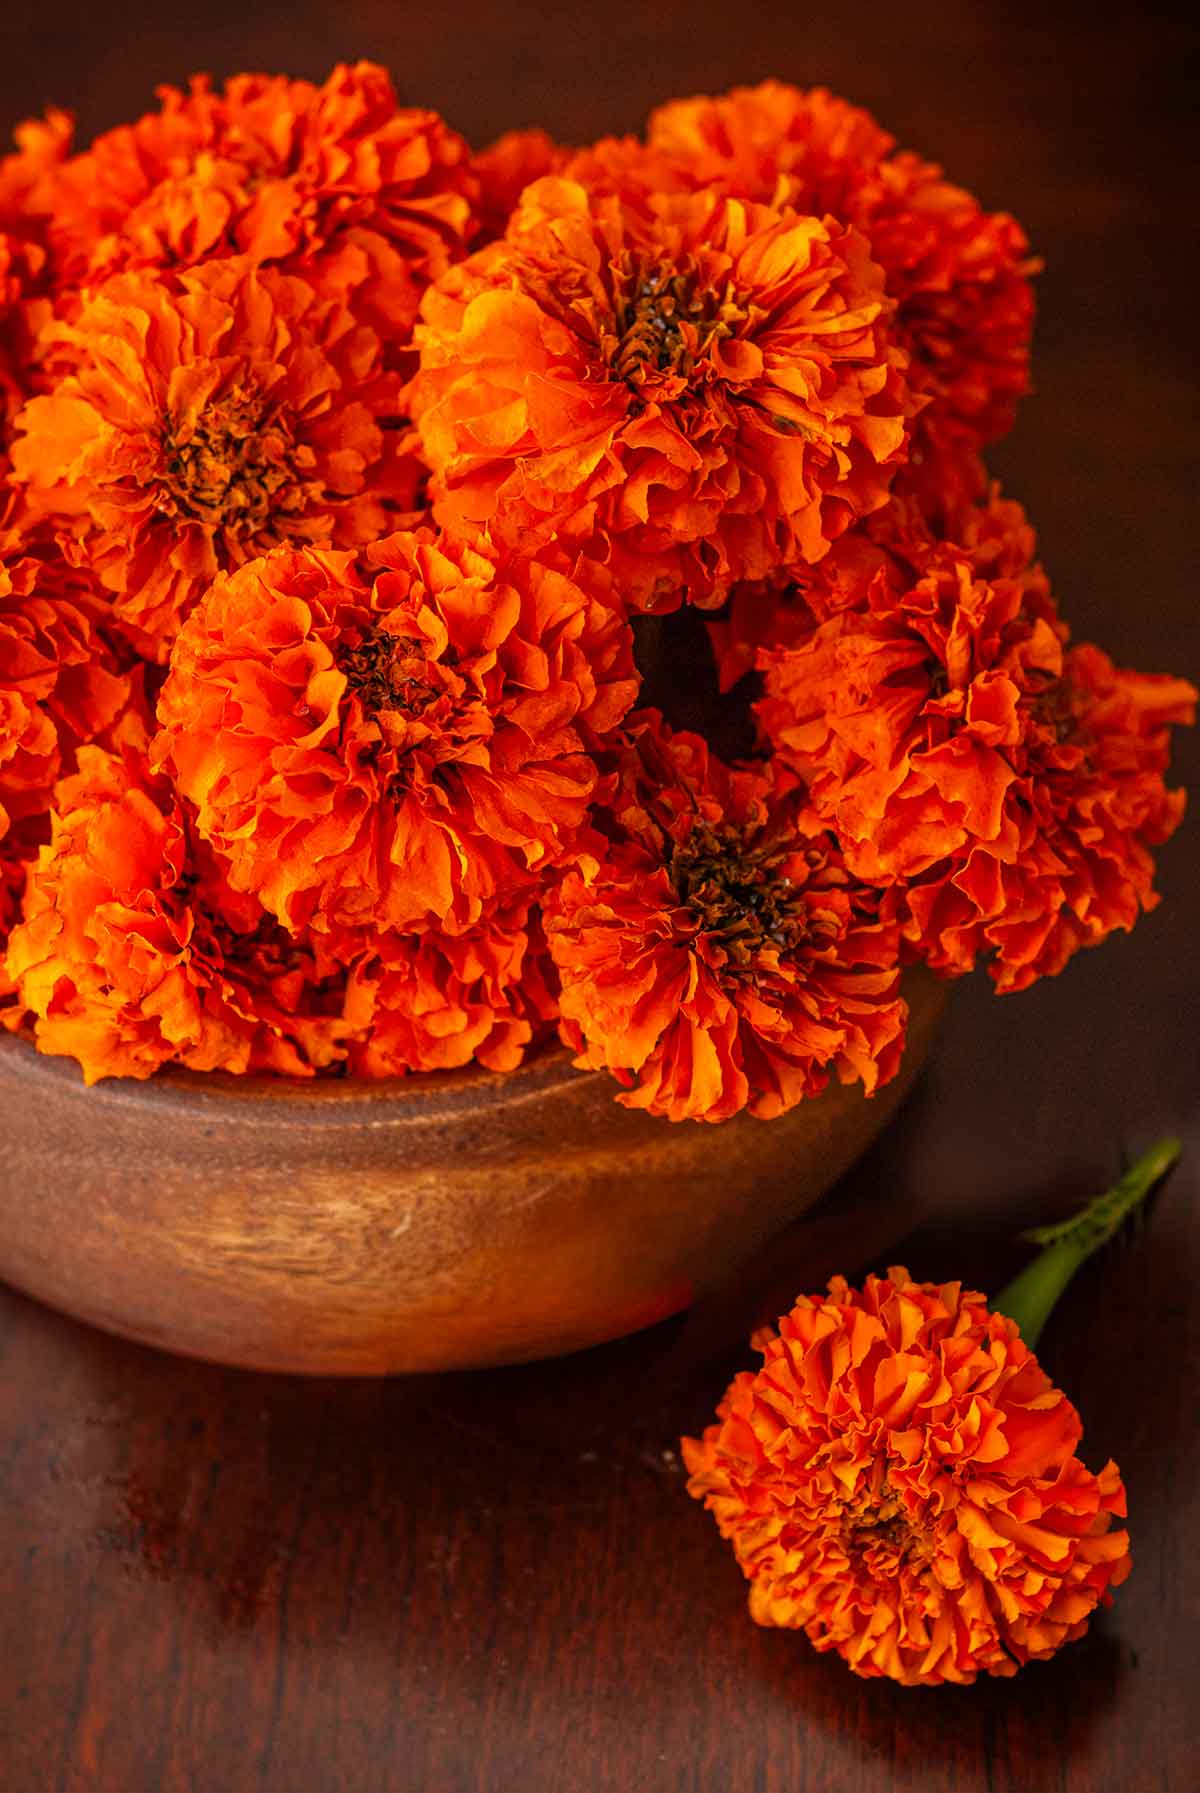 A bowl of about 12 dry marigolds beside 1 blossom on a table.